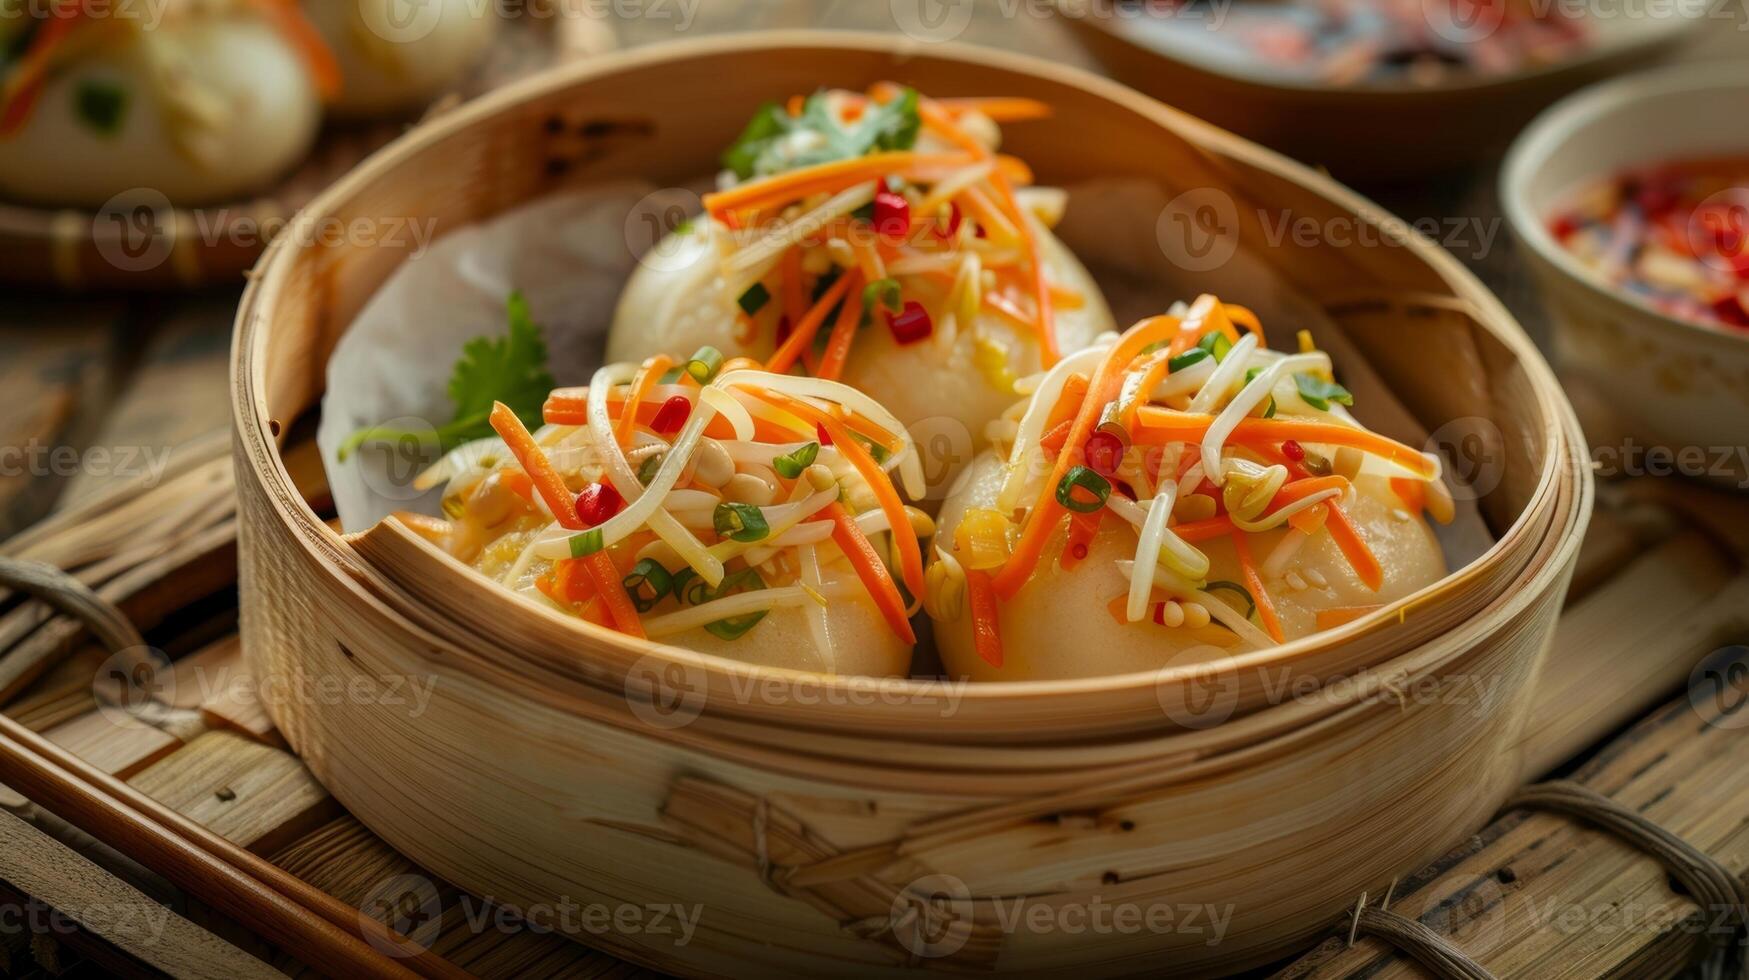 A vibrant papaya salad adds a refreshing tropical twist to the traditional steamed buns photo